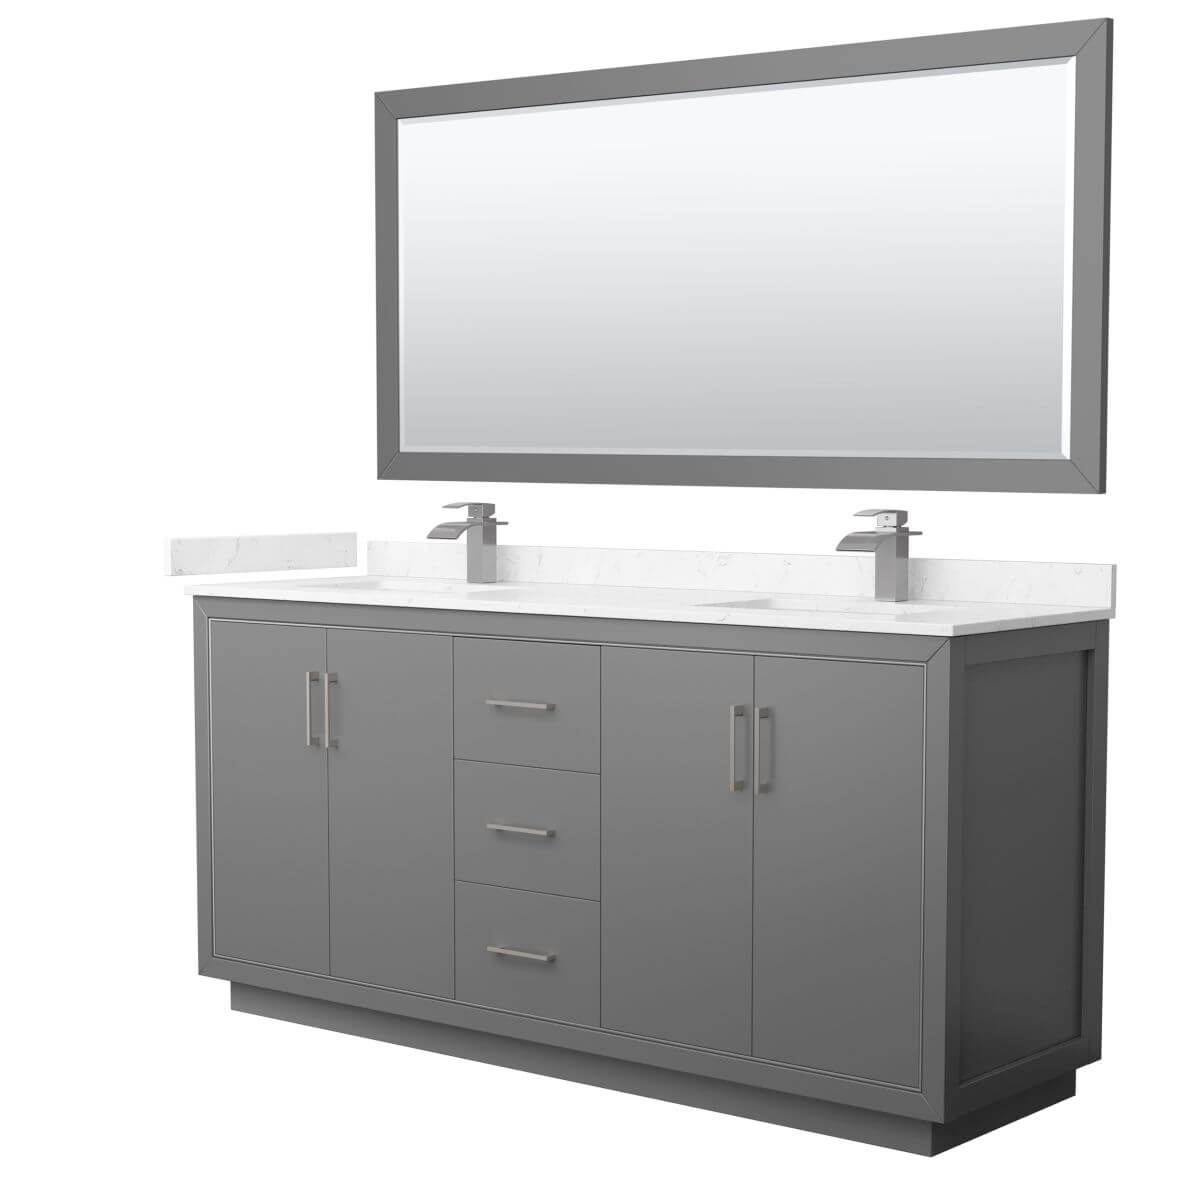 Wyndham Collection WCF111172DKGC2UNSM70 Icon 72 inch Double Bathroom Vanity in Dark Gray with Carrara Cultured Marble Countertop, Undermount Square Sinks, Brushed Nickel Trim and 70 Inch Mirror